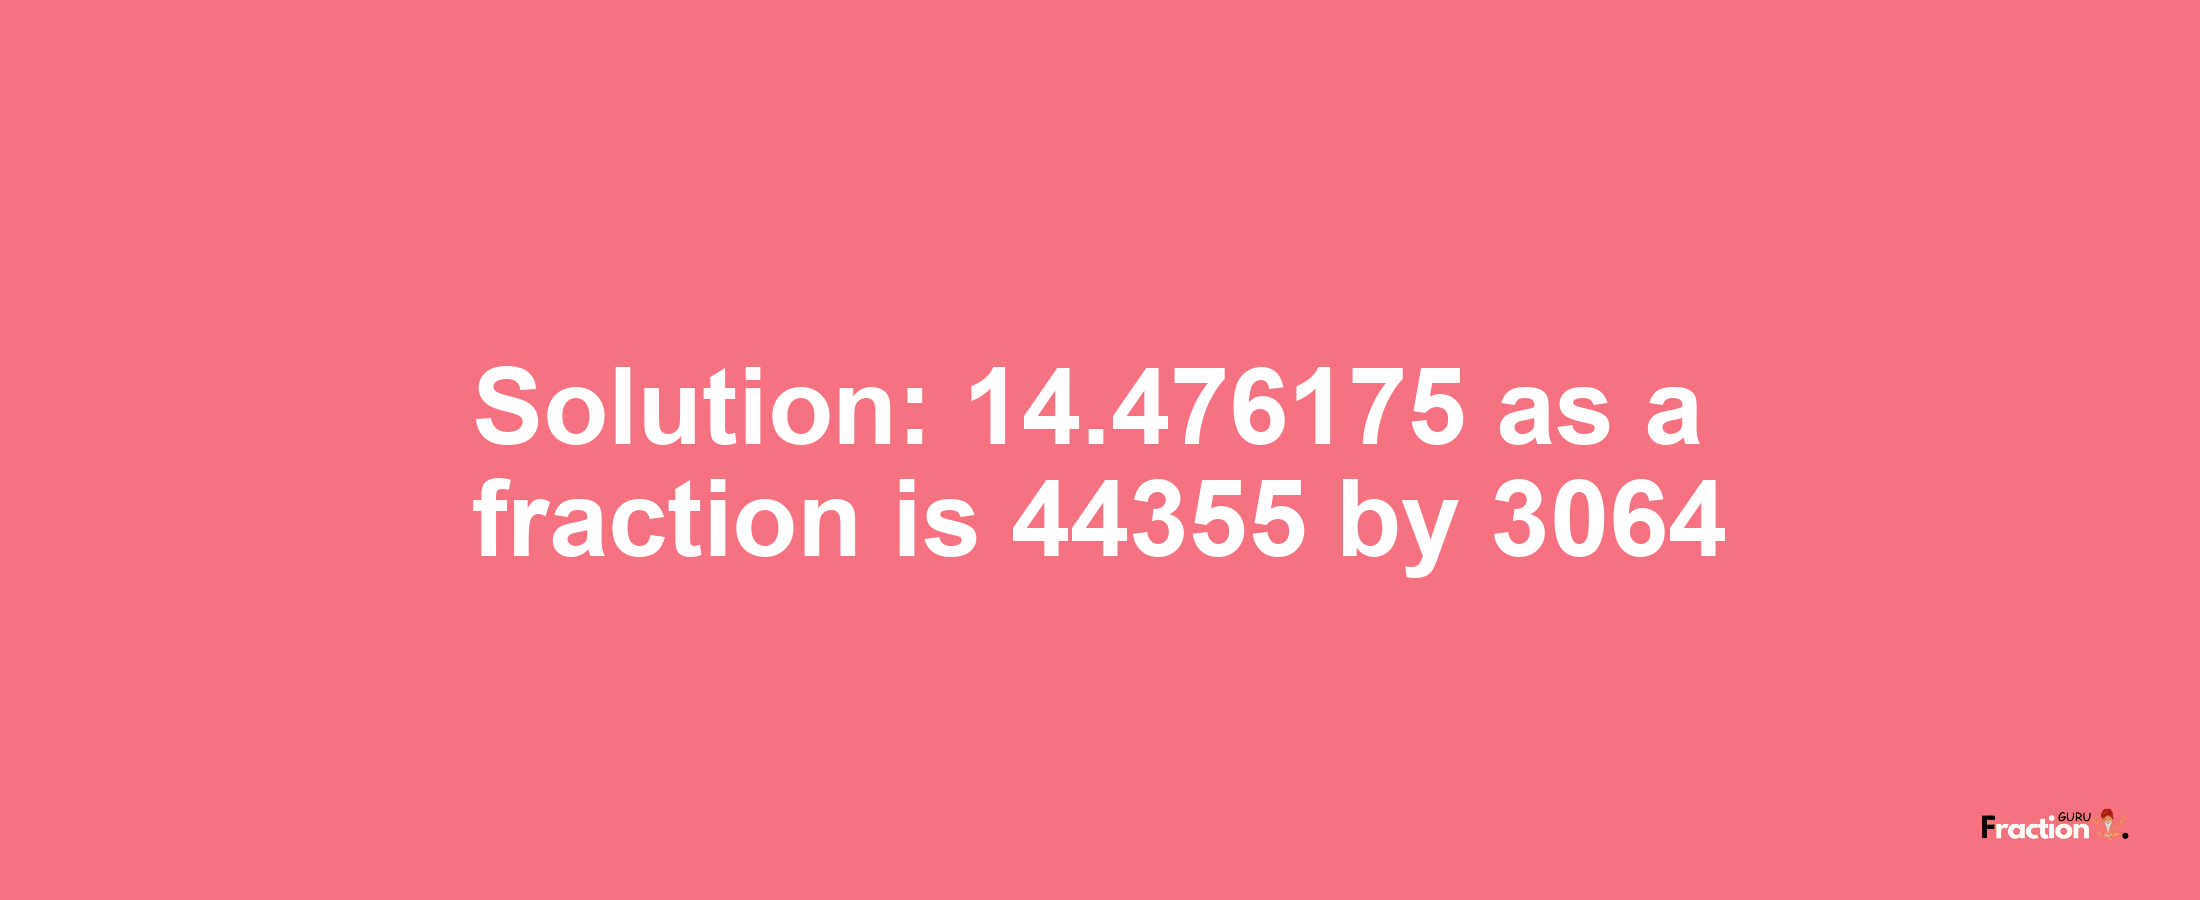 Solution:14.476175 as a fraction is 44355/3064